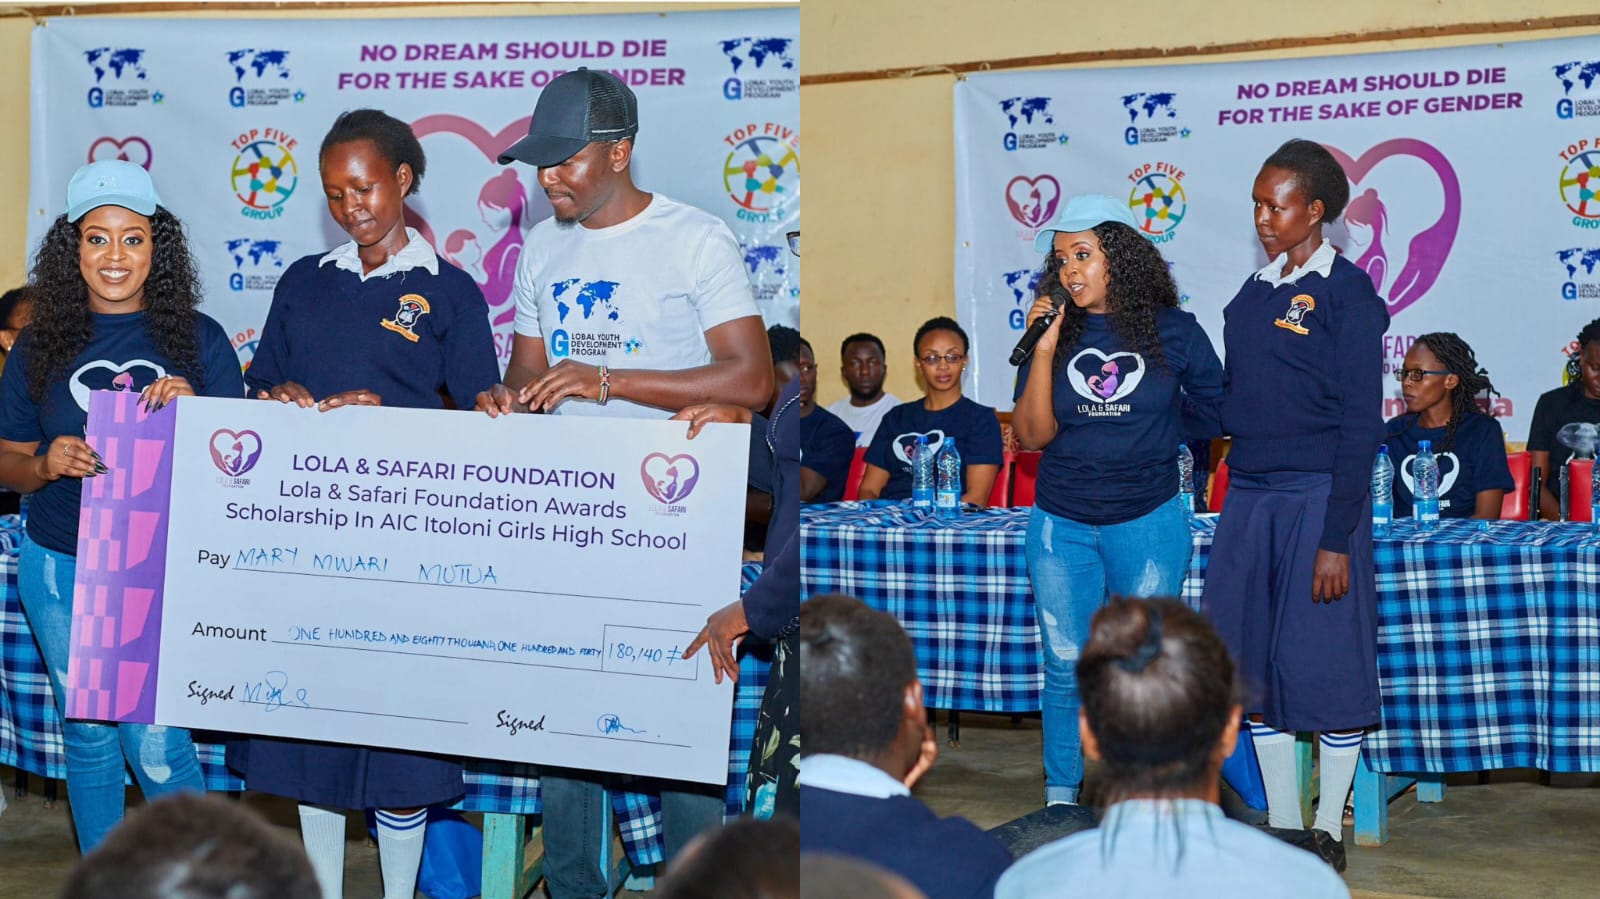 Lola and Safari Foundation by Nadia Mukami and Arrow Bwoy gives a full scholarship to a teenage mother